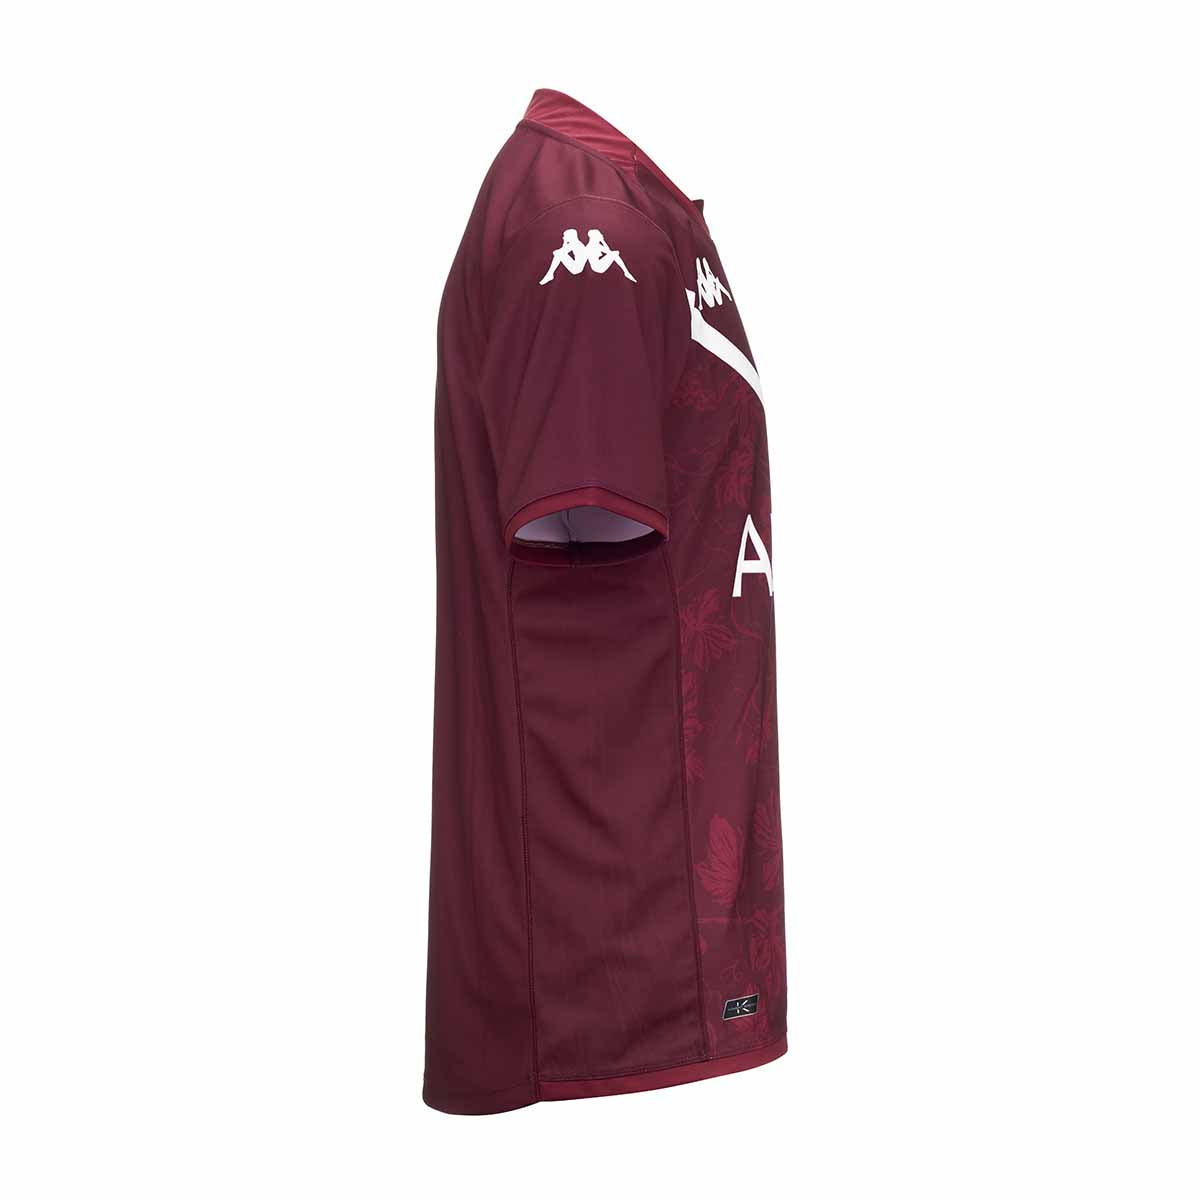 Maillot Kombat Away UBB 23/24 Rouge Homme